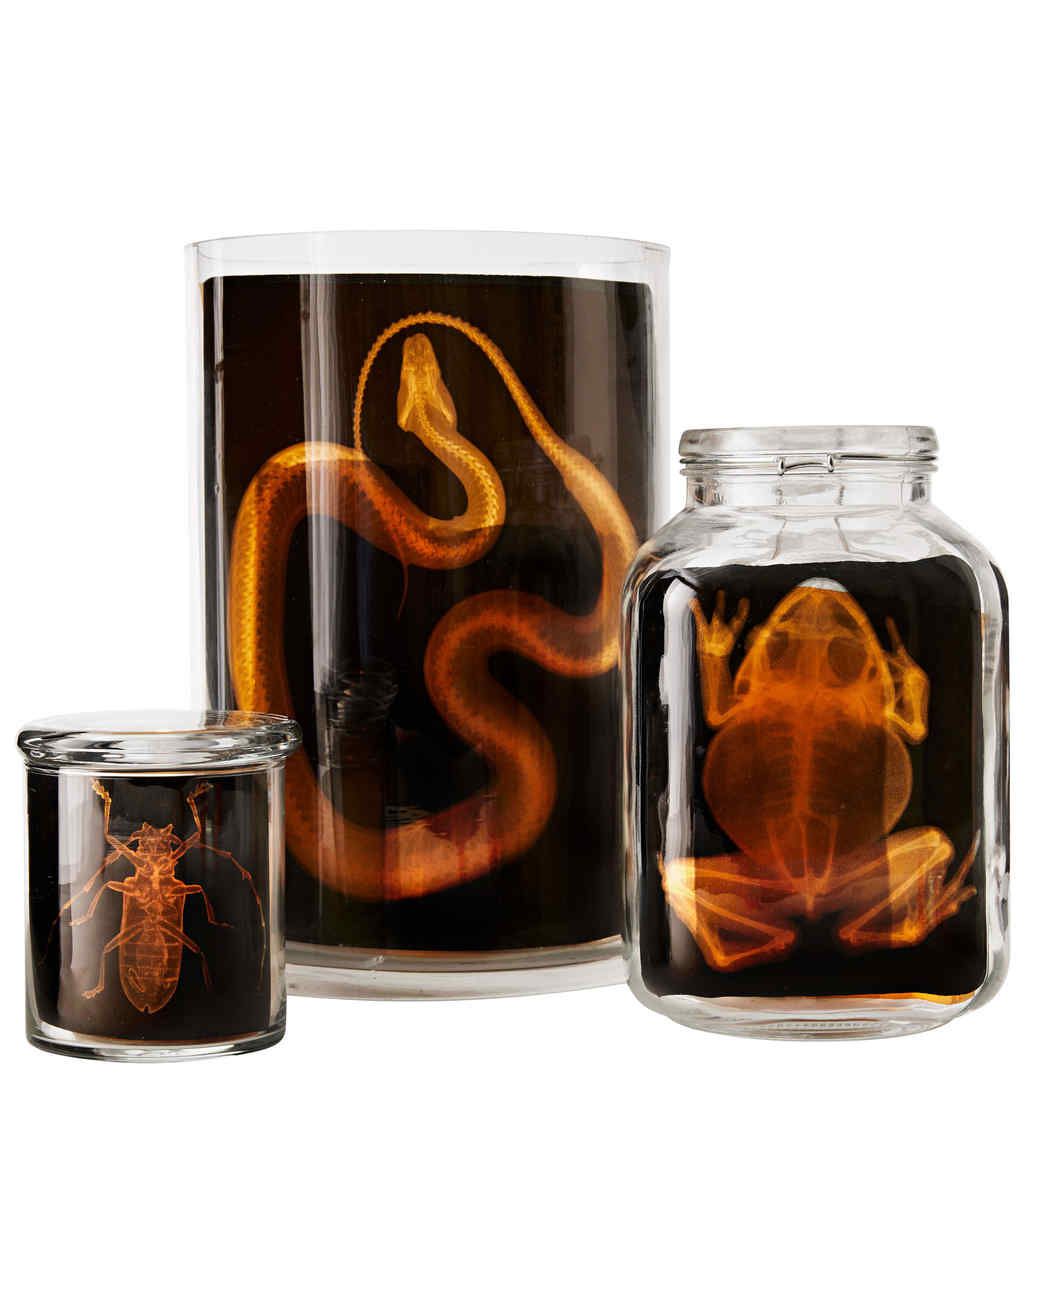 glass jars with images of animal x-rays